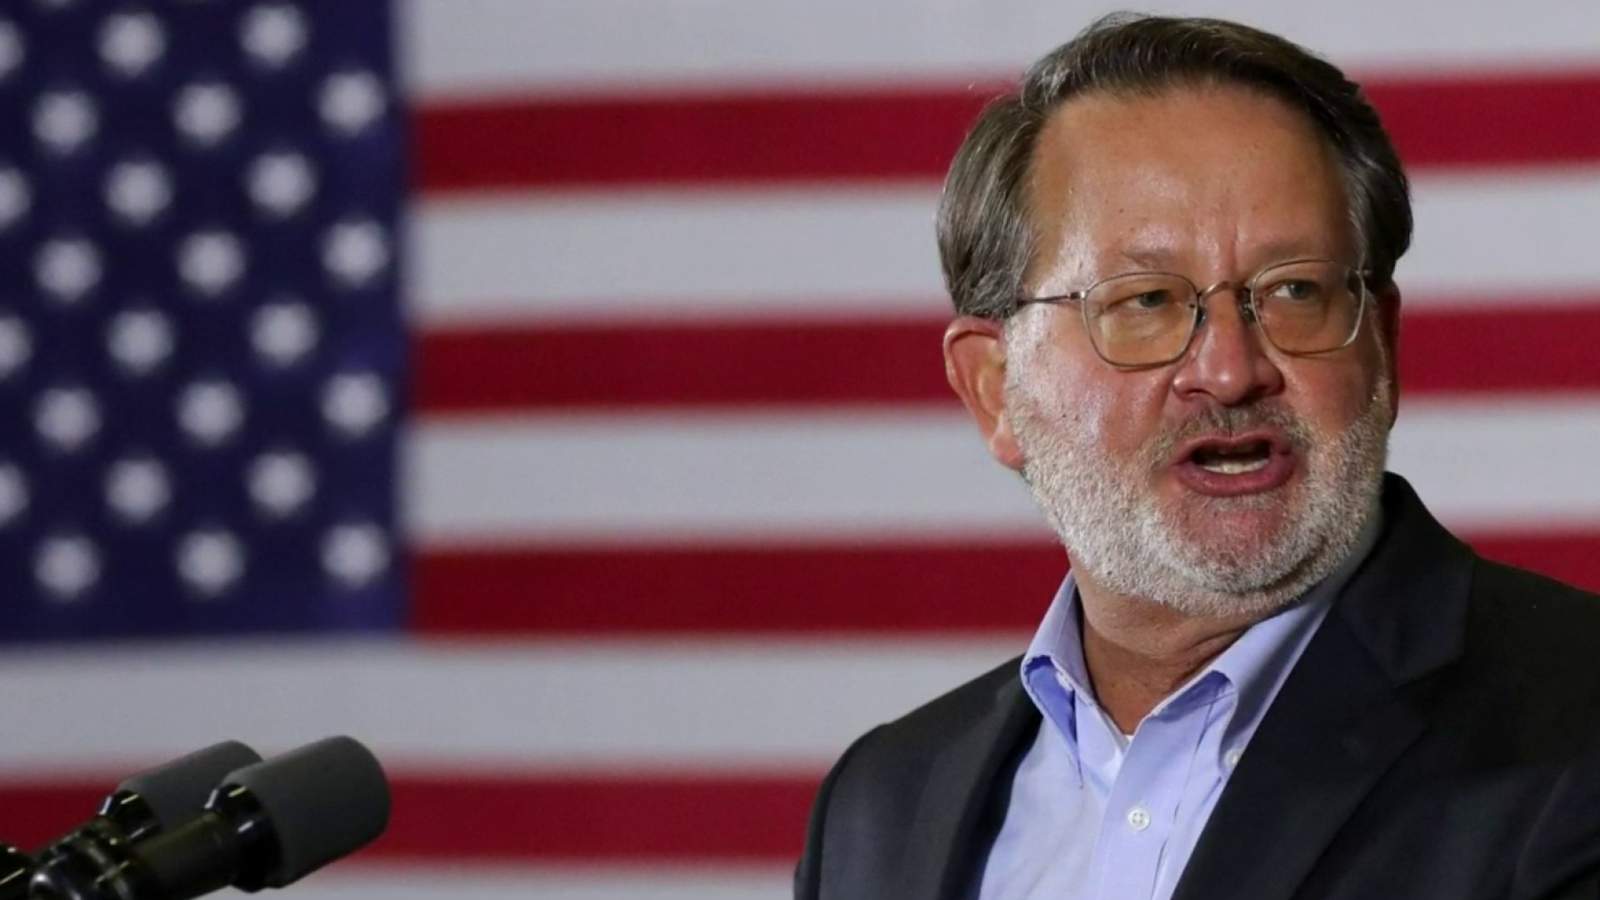 Michigan Sen. Gary Peters becomes first sitting senator to share personal abortion experience